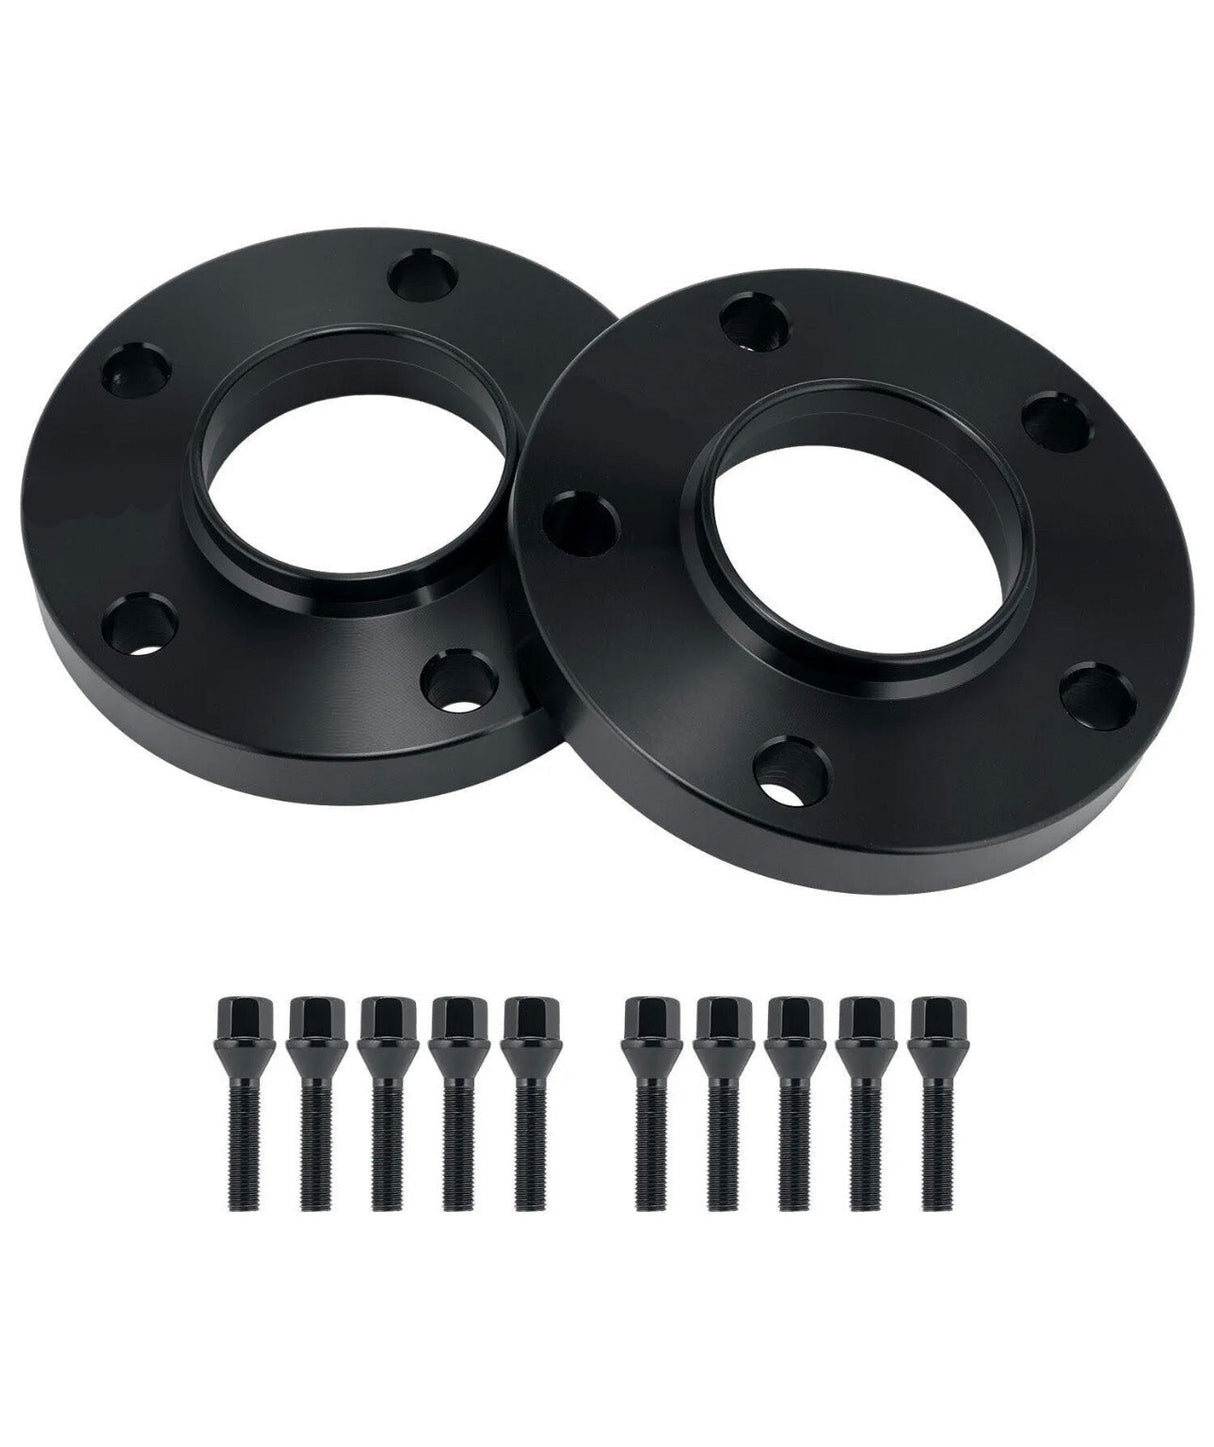 2 Series - F22/F23: Black Wheel Spacers & Bolts 14-21